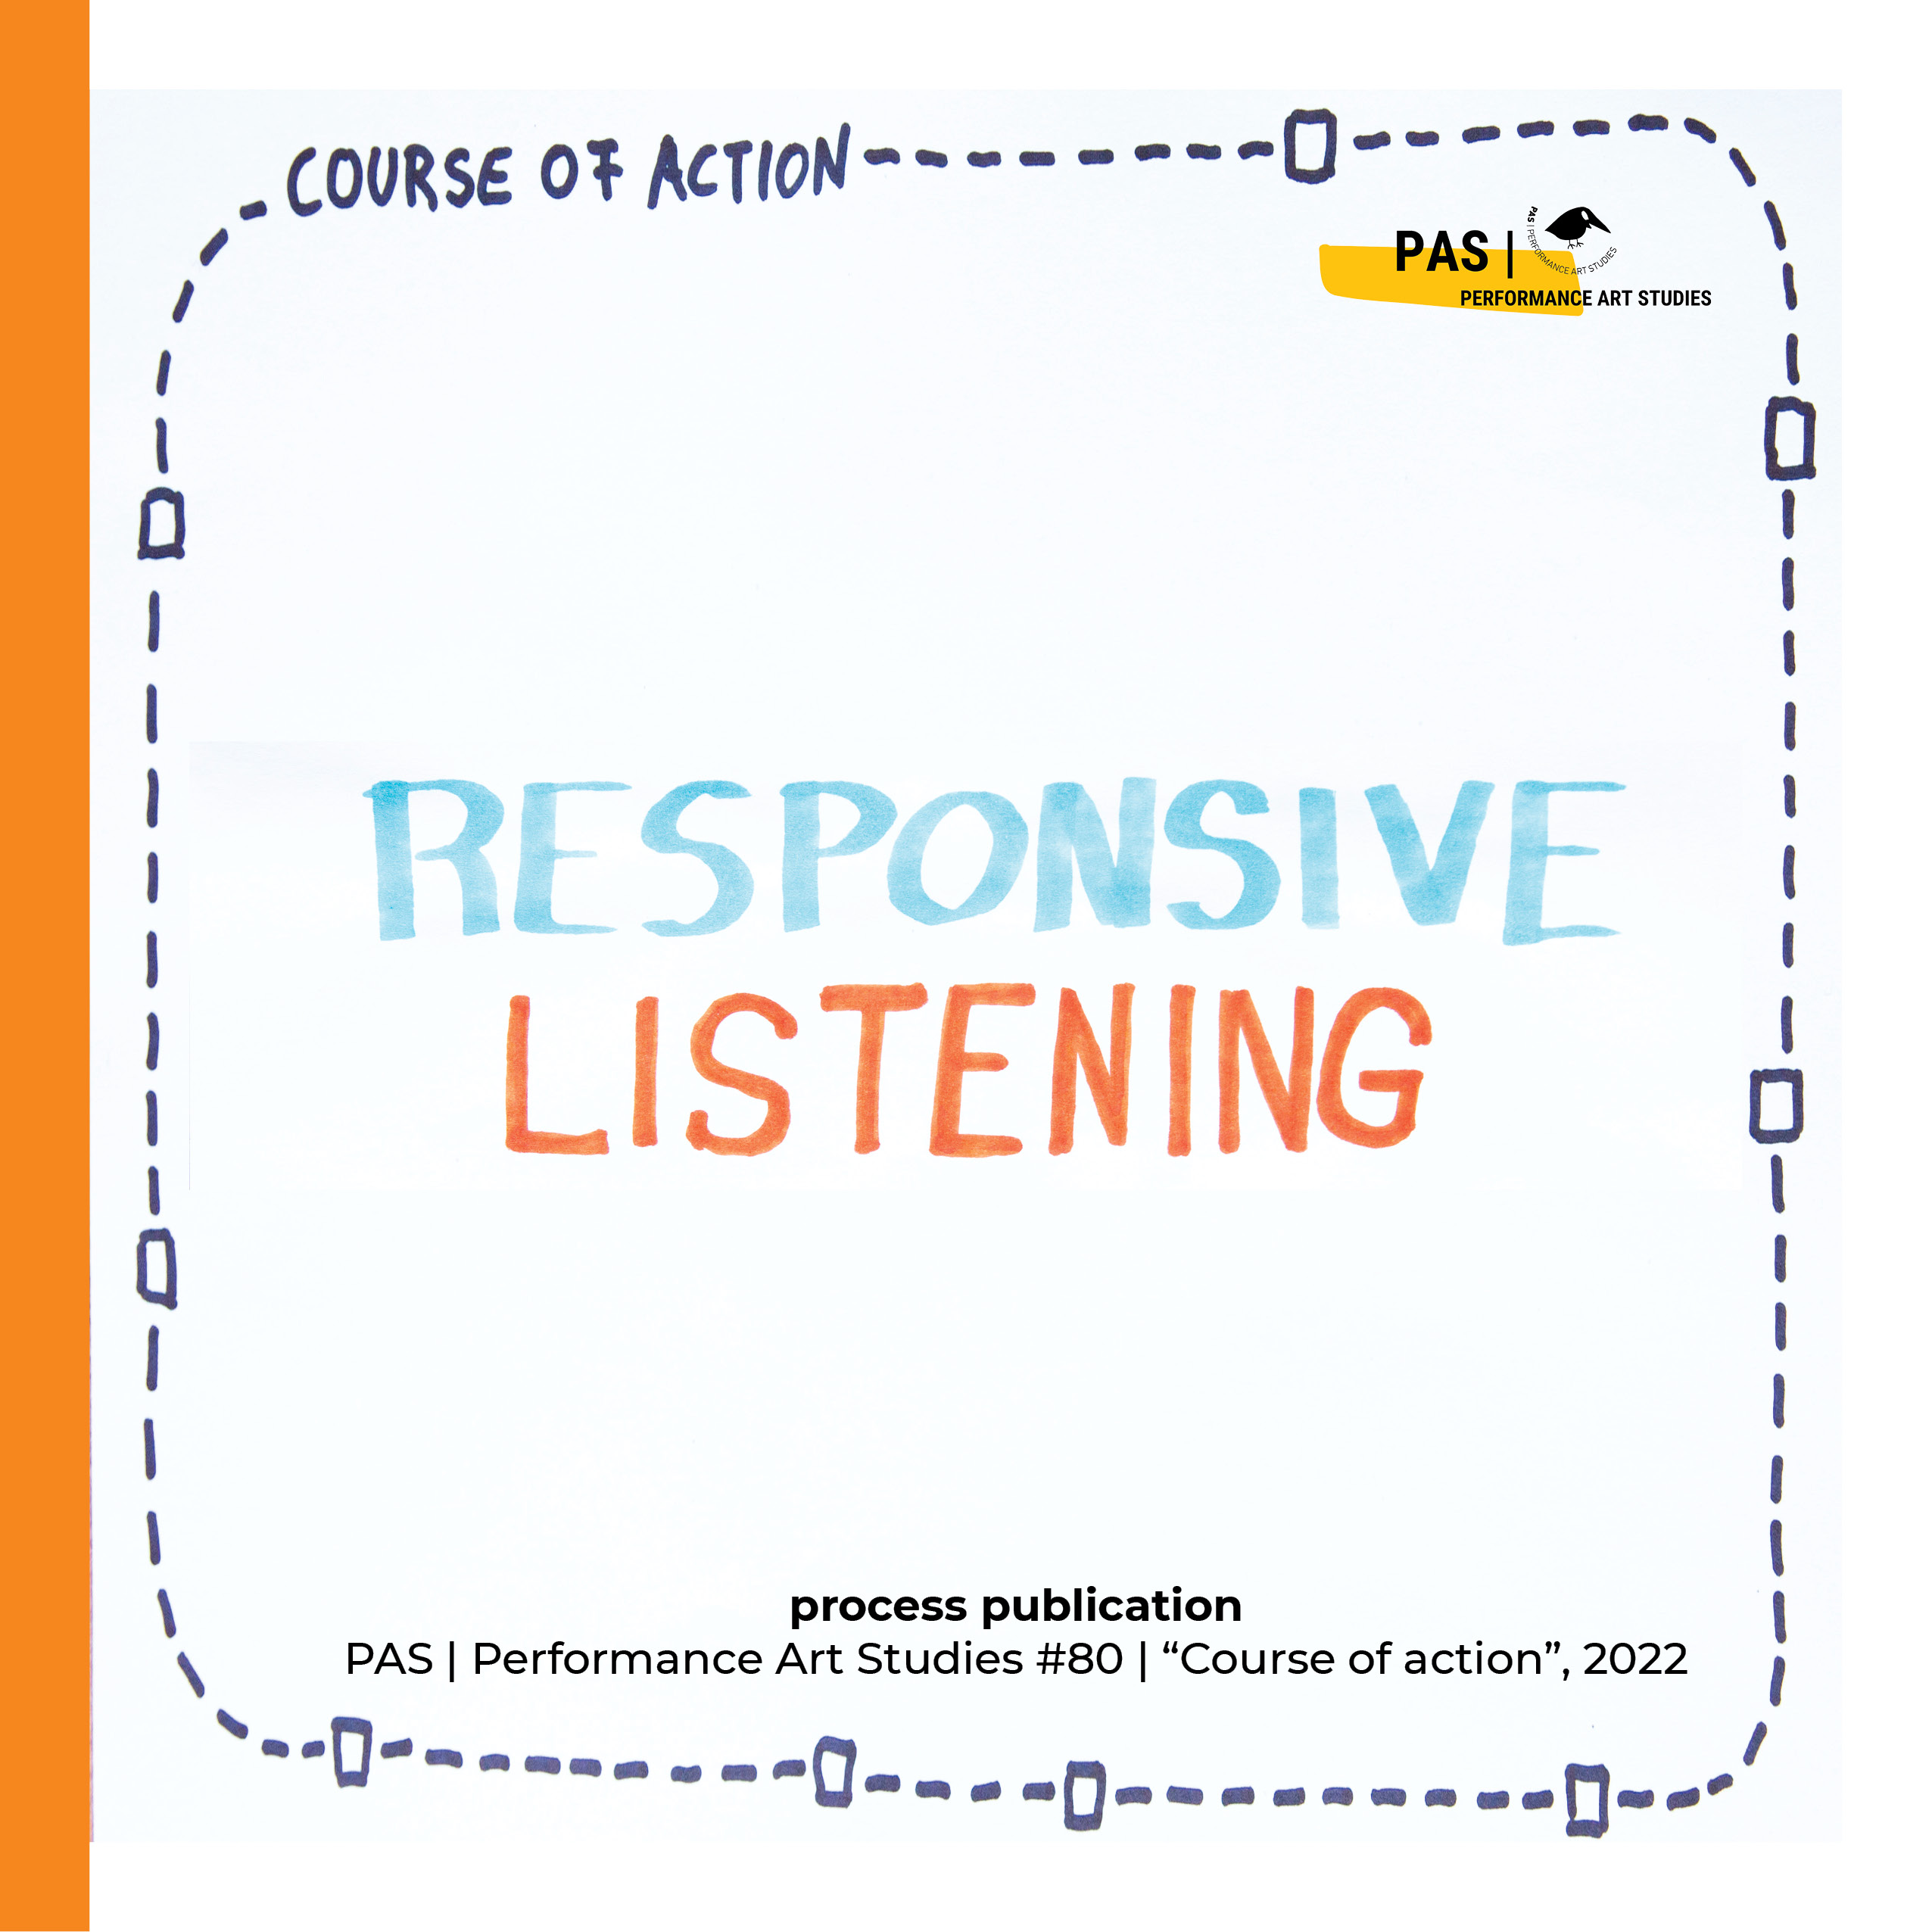 Cover page of the process publication "Responsive Listening" documenting the whole performance process of PAS | Performance Art Studies 80 in Nijmegen, Netherlands